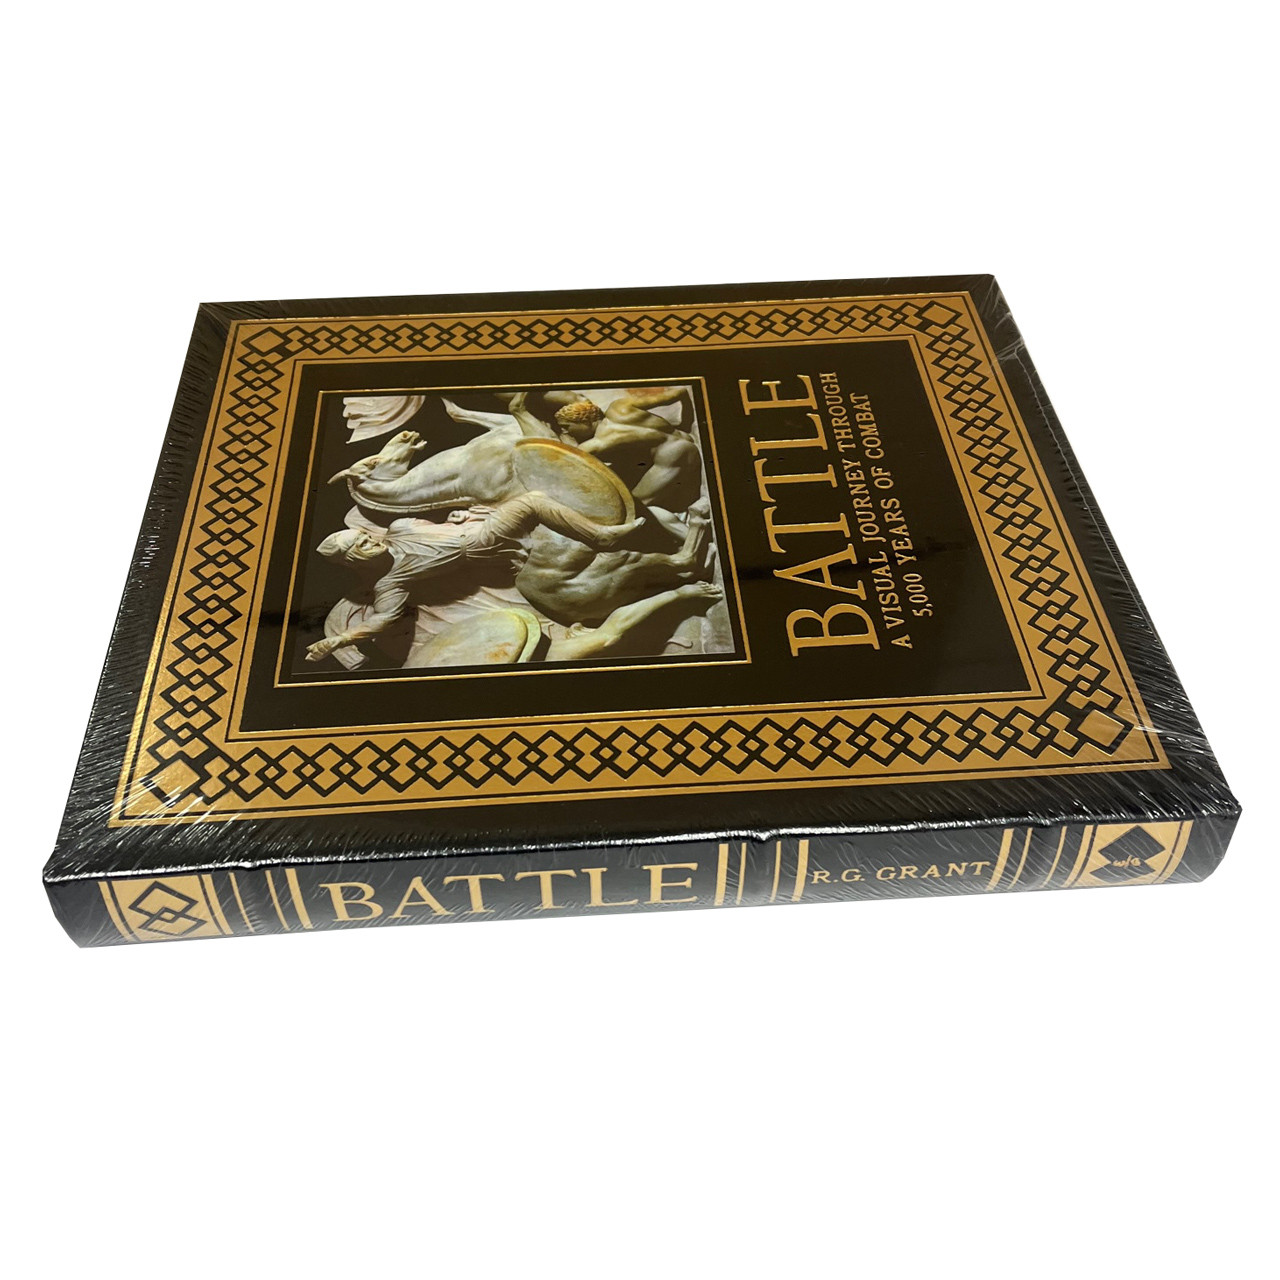 R.G. Grant "BATTLE: A Visual Journey Through 5,000 Years of Combat" Deluxe Limited Edition, Leather Bound Collector's Edition [Sealed]